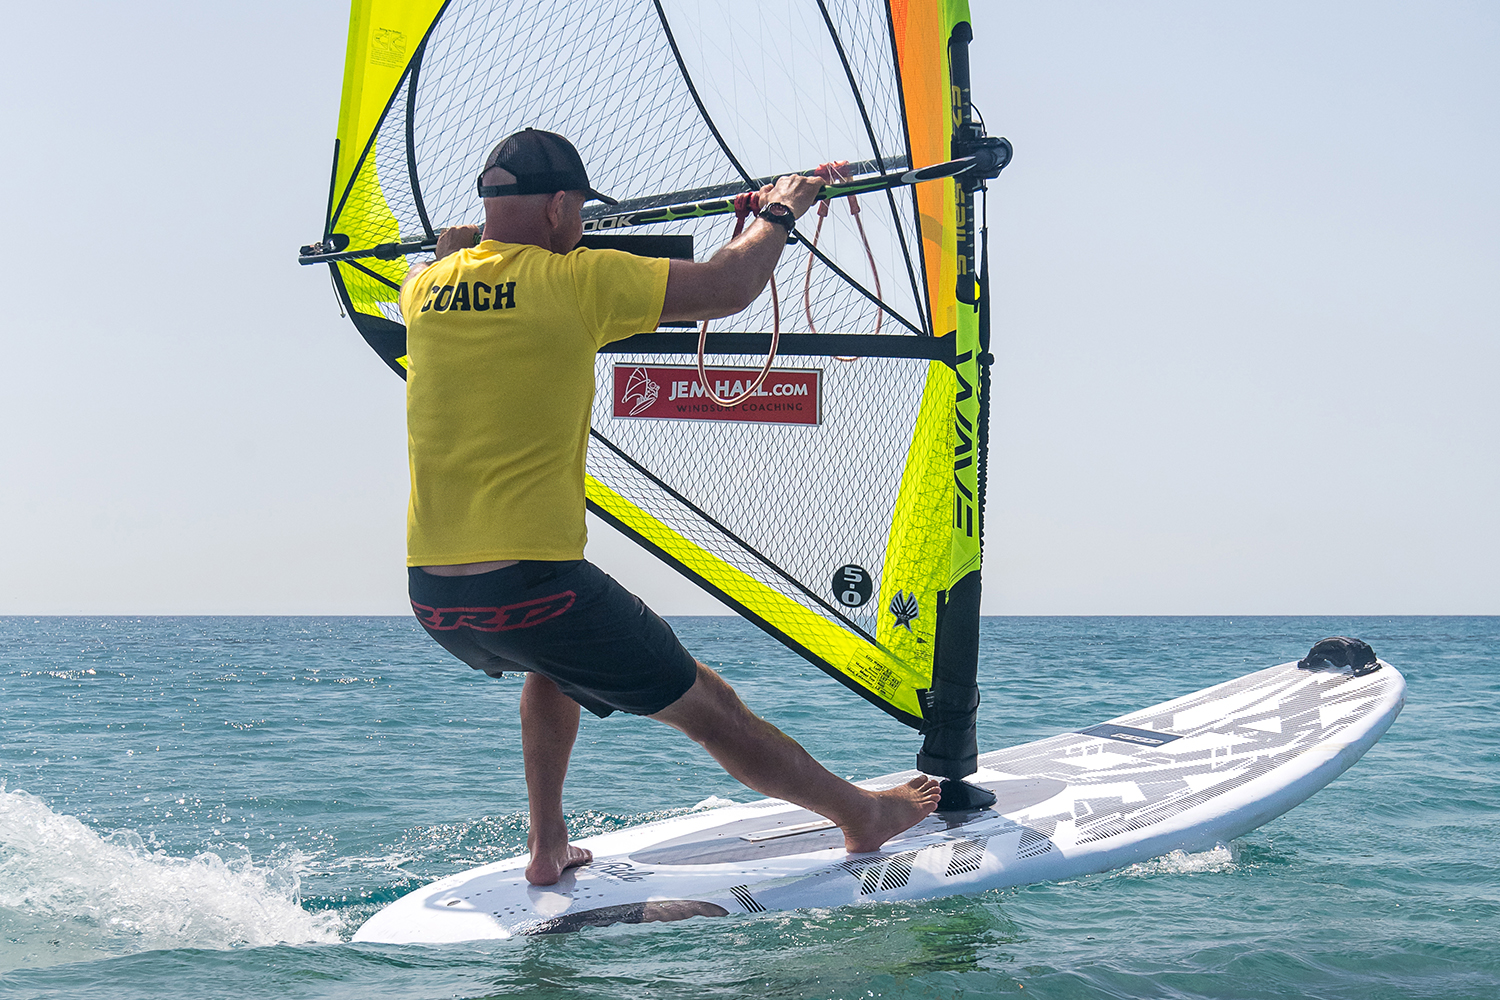 Set up across the wind with your hands back, and back foot way back. Turn downwind by getting the rig forwards and across you, whilst your legs scissor hard, front foot pushing and back foot really pulling. Being back and out puts you in a strong position.